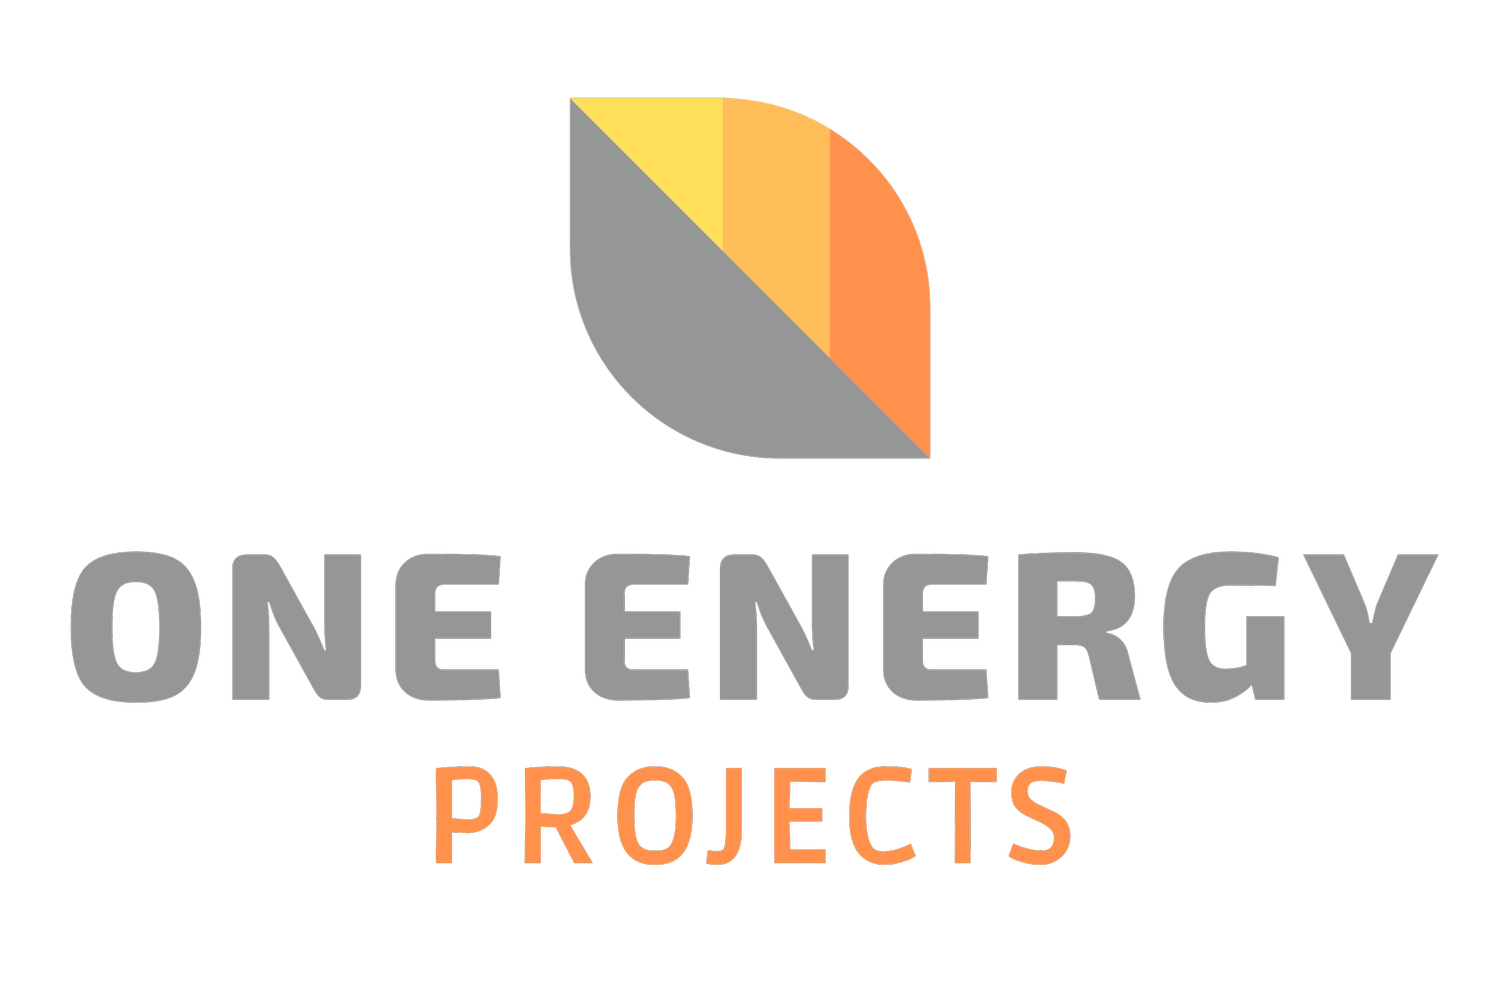 One Energy Projects